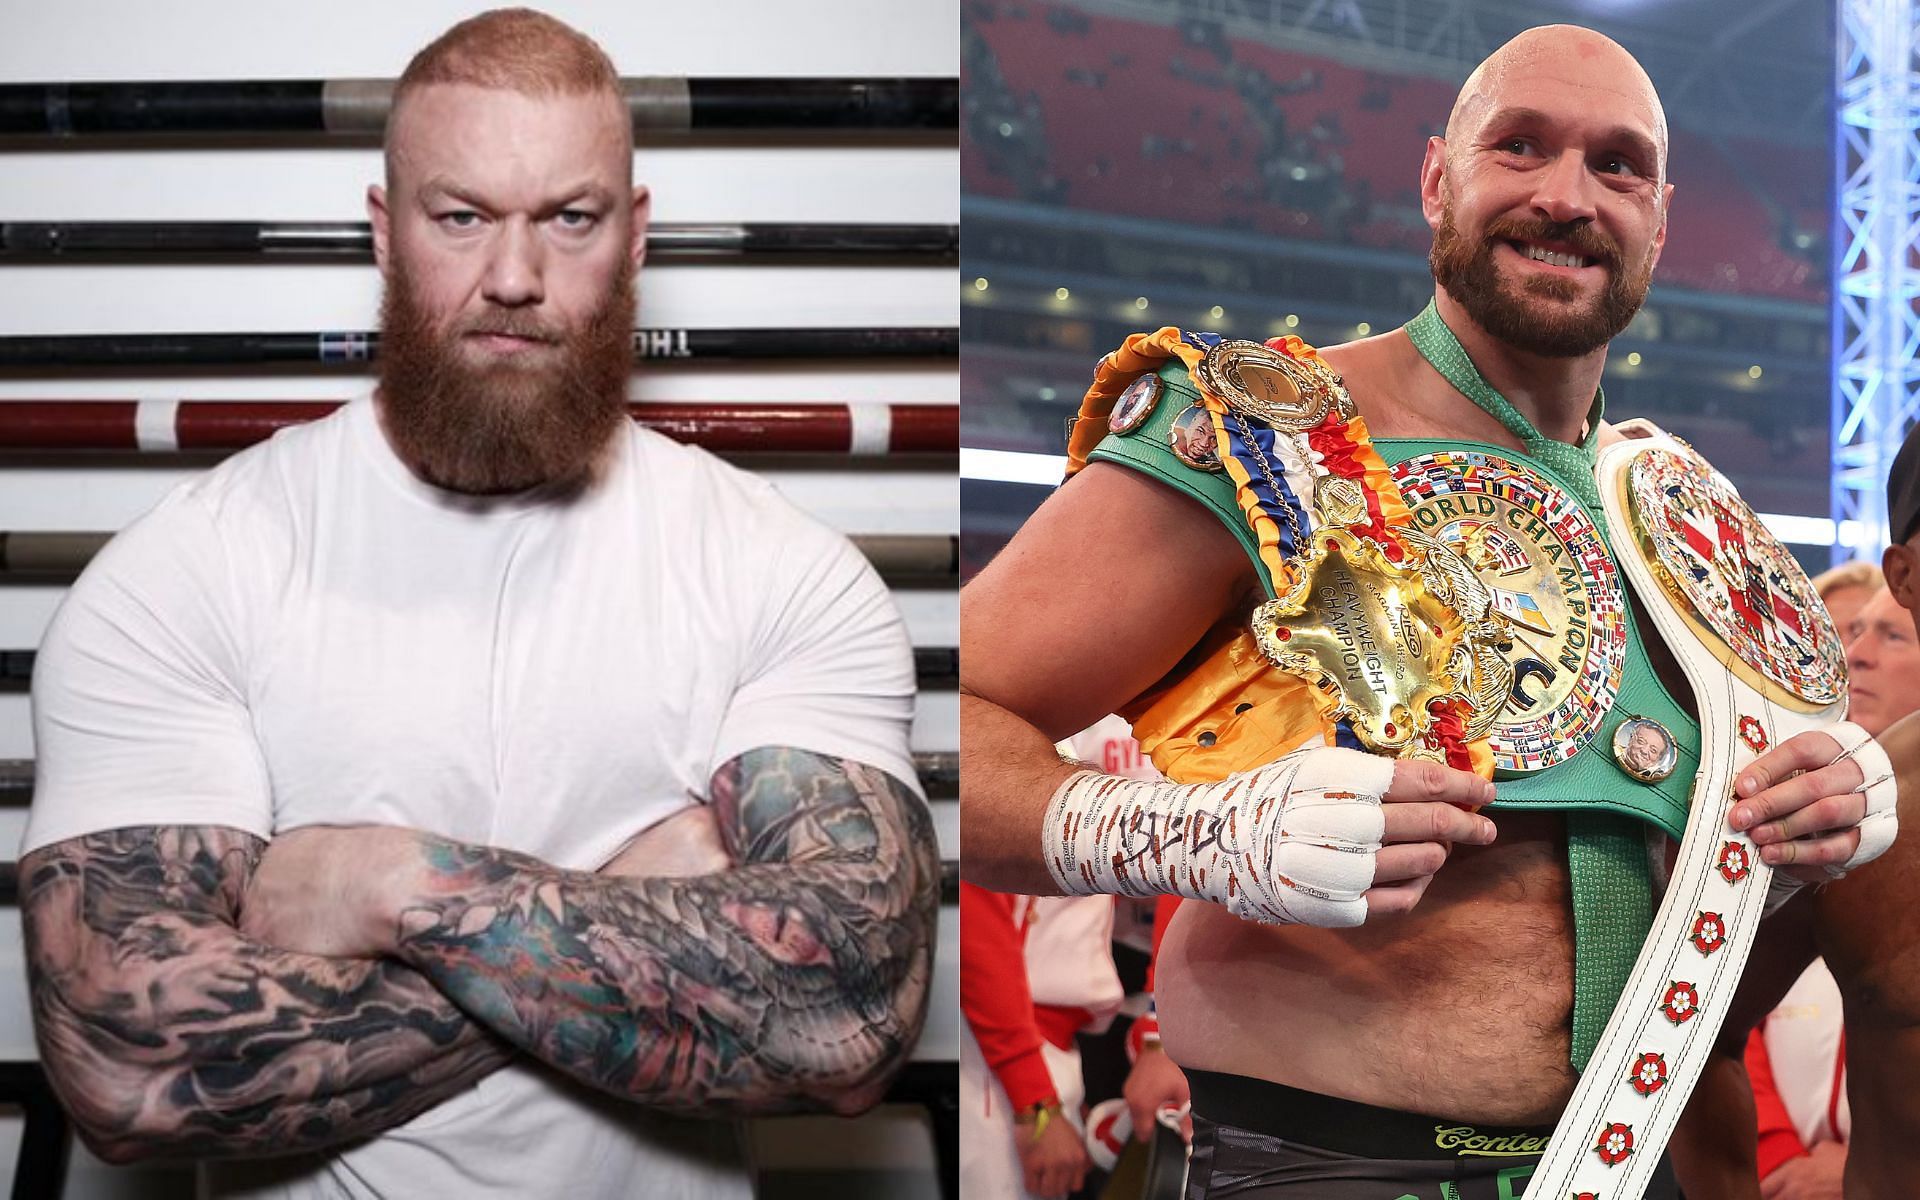 Thor Bjornsson (L) and Tyson Fury (R) (Image credits @thorbjornsson on Instagram and Getty Images)